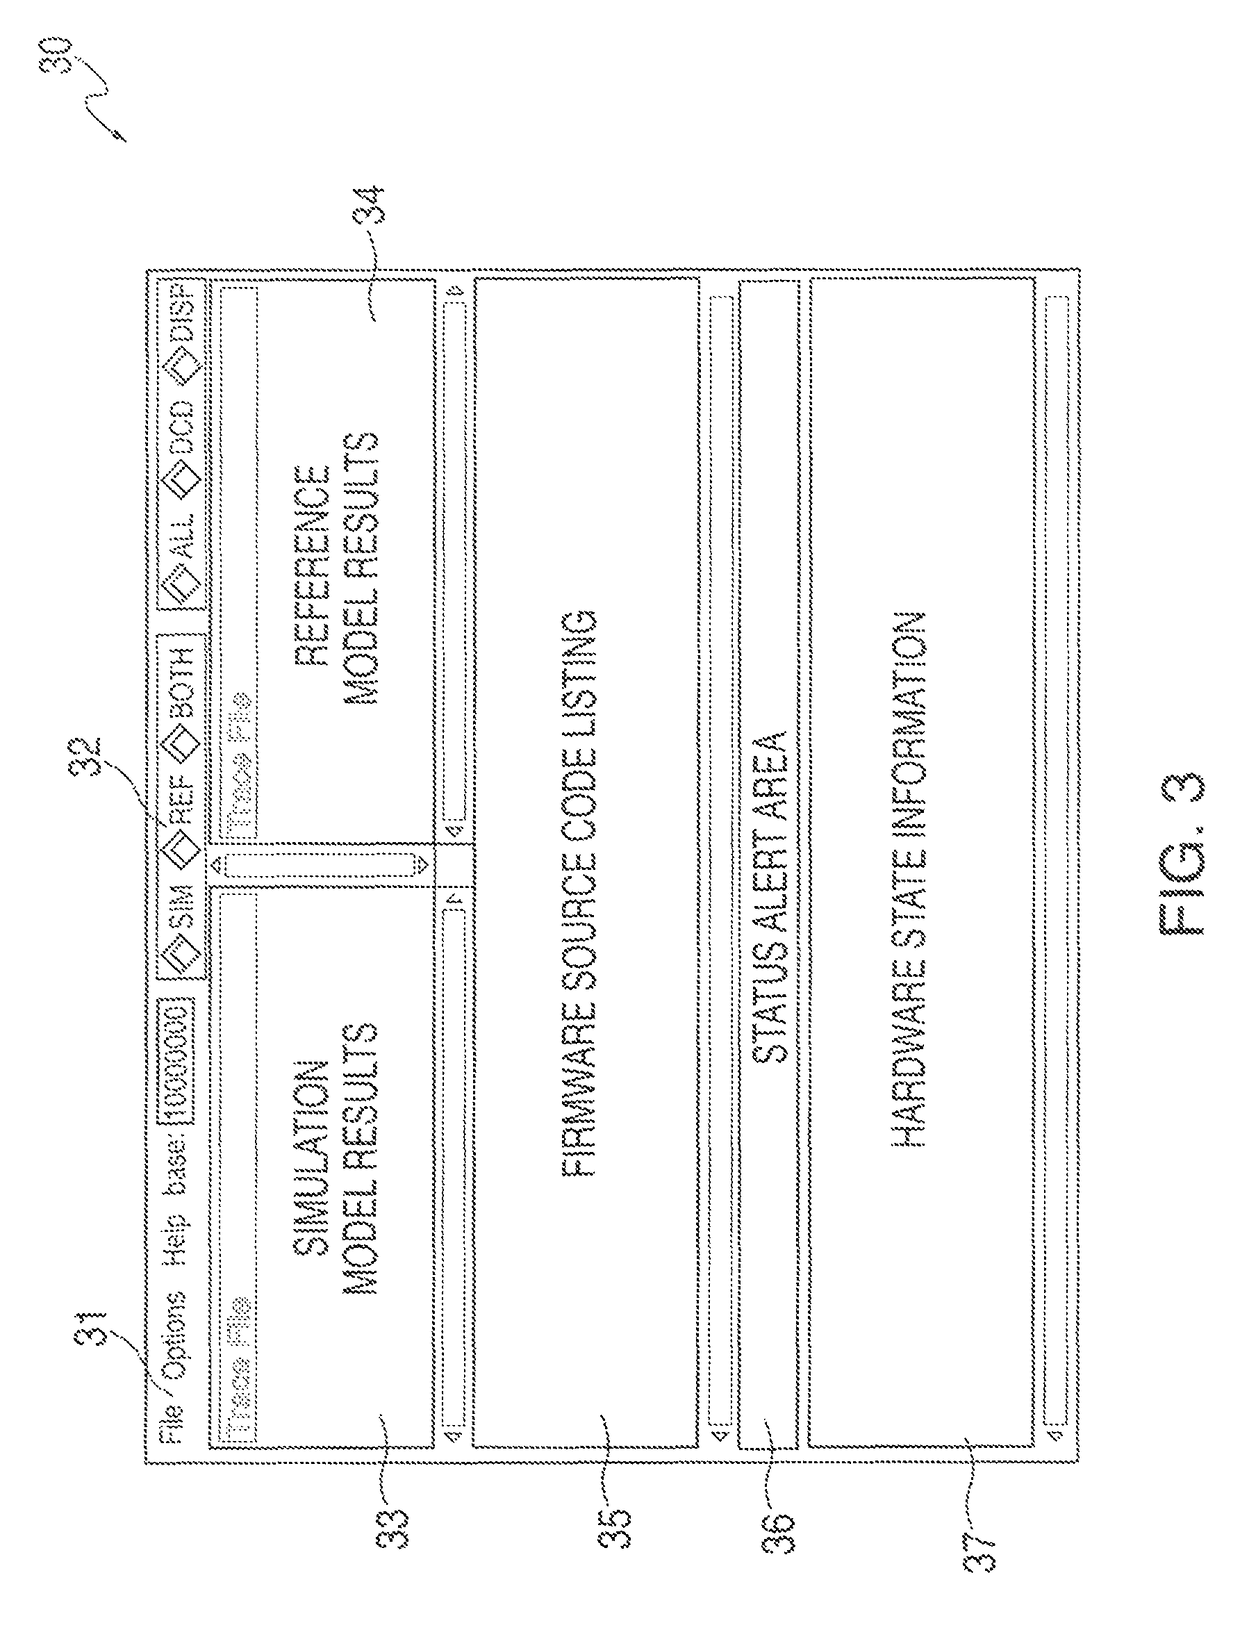 Method, system and computer program product for failure analysis implementing automated comparison of multiple reference models